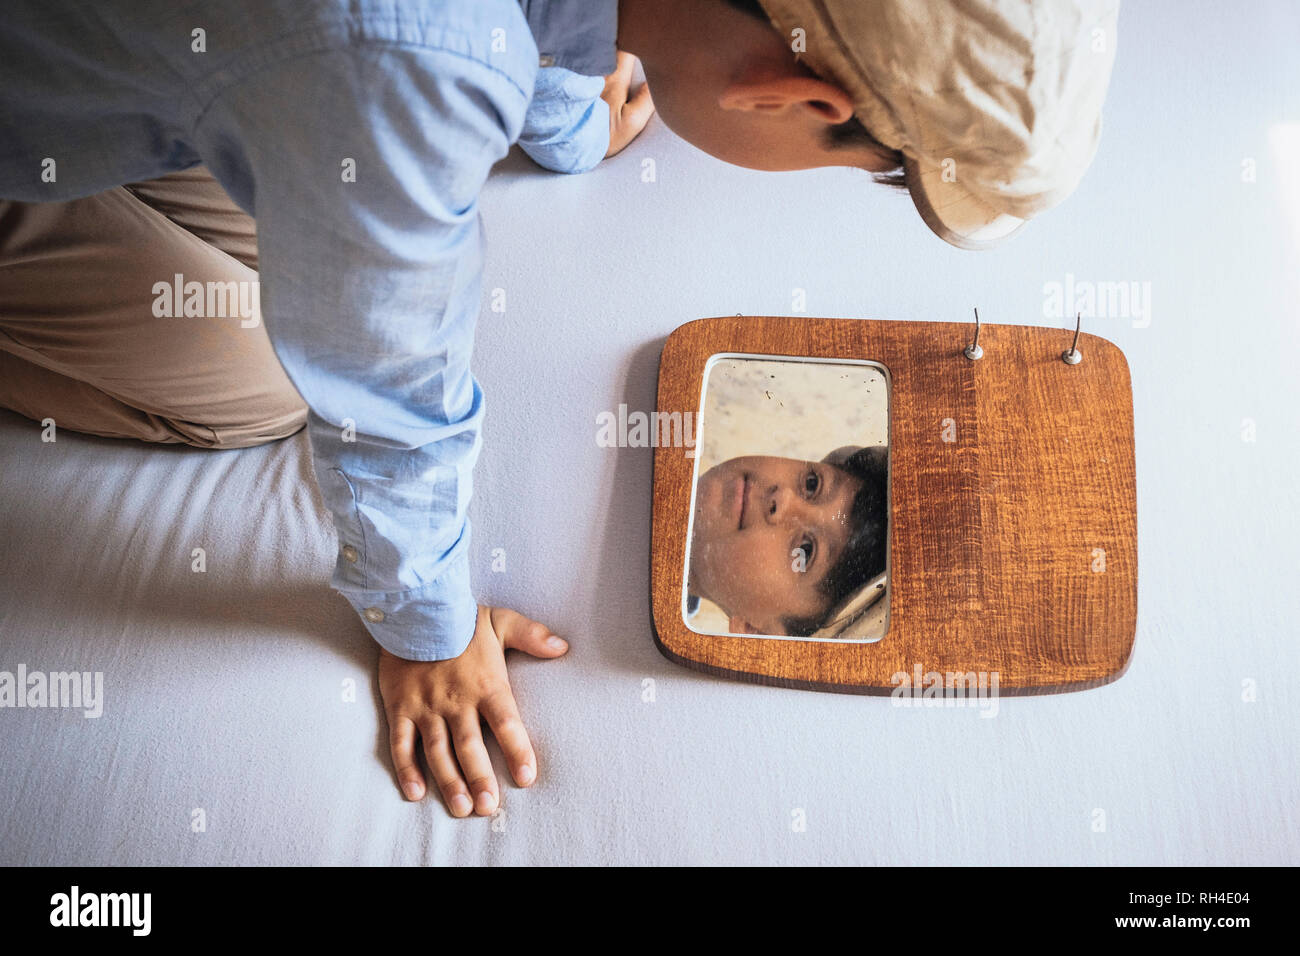 Boy looking at reflection in mirror on bed Stock Photo